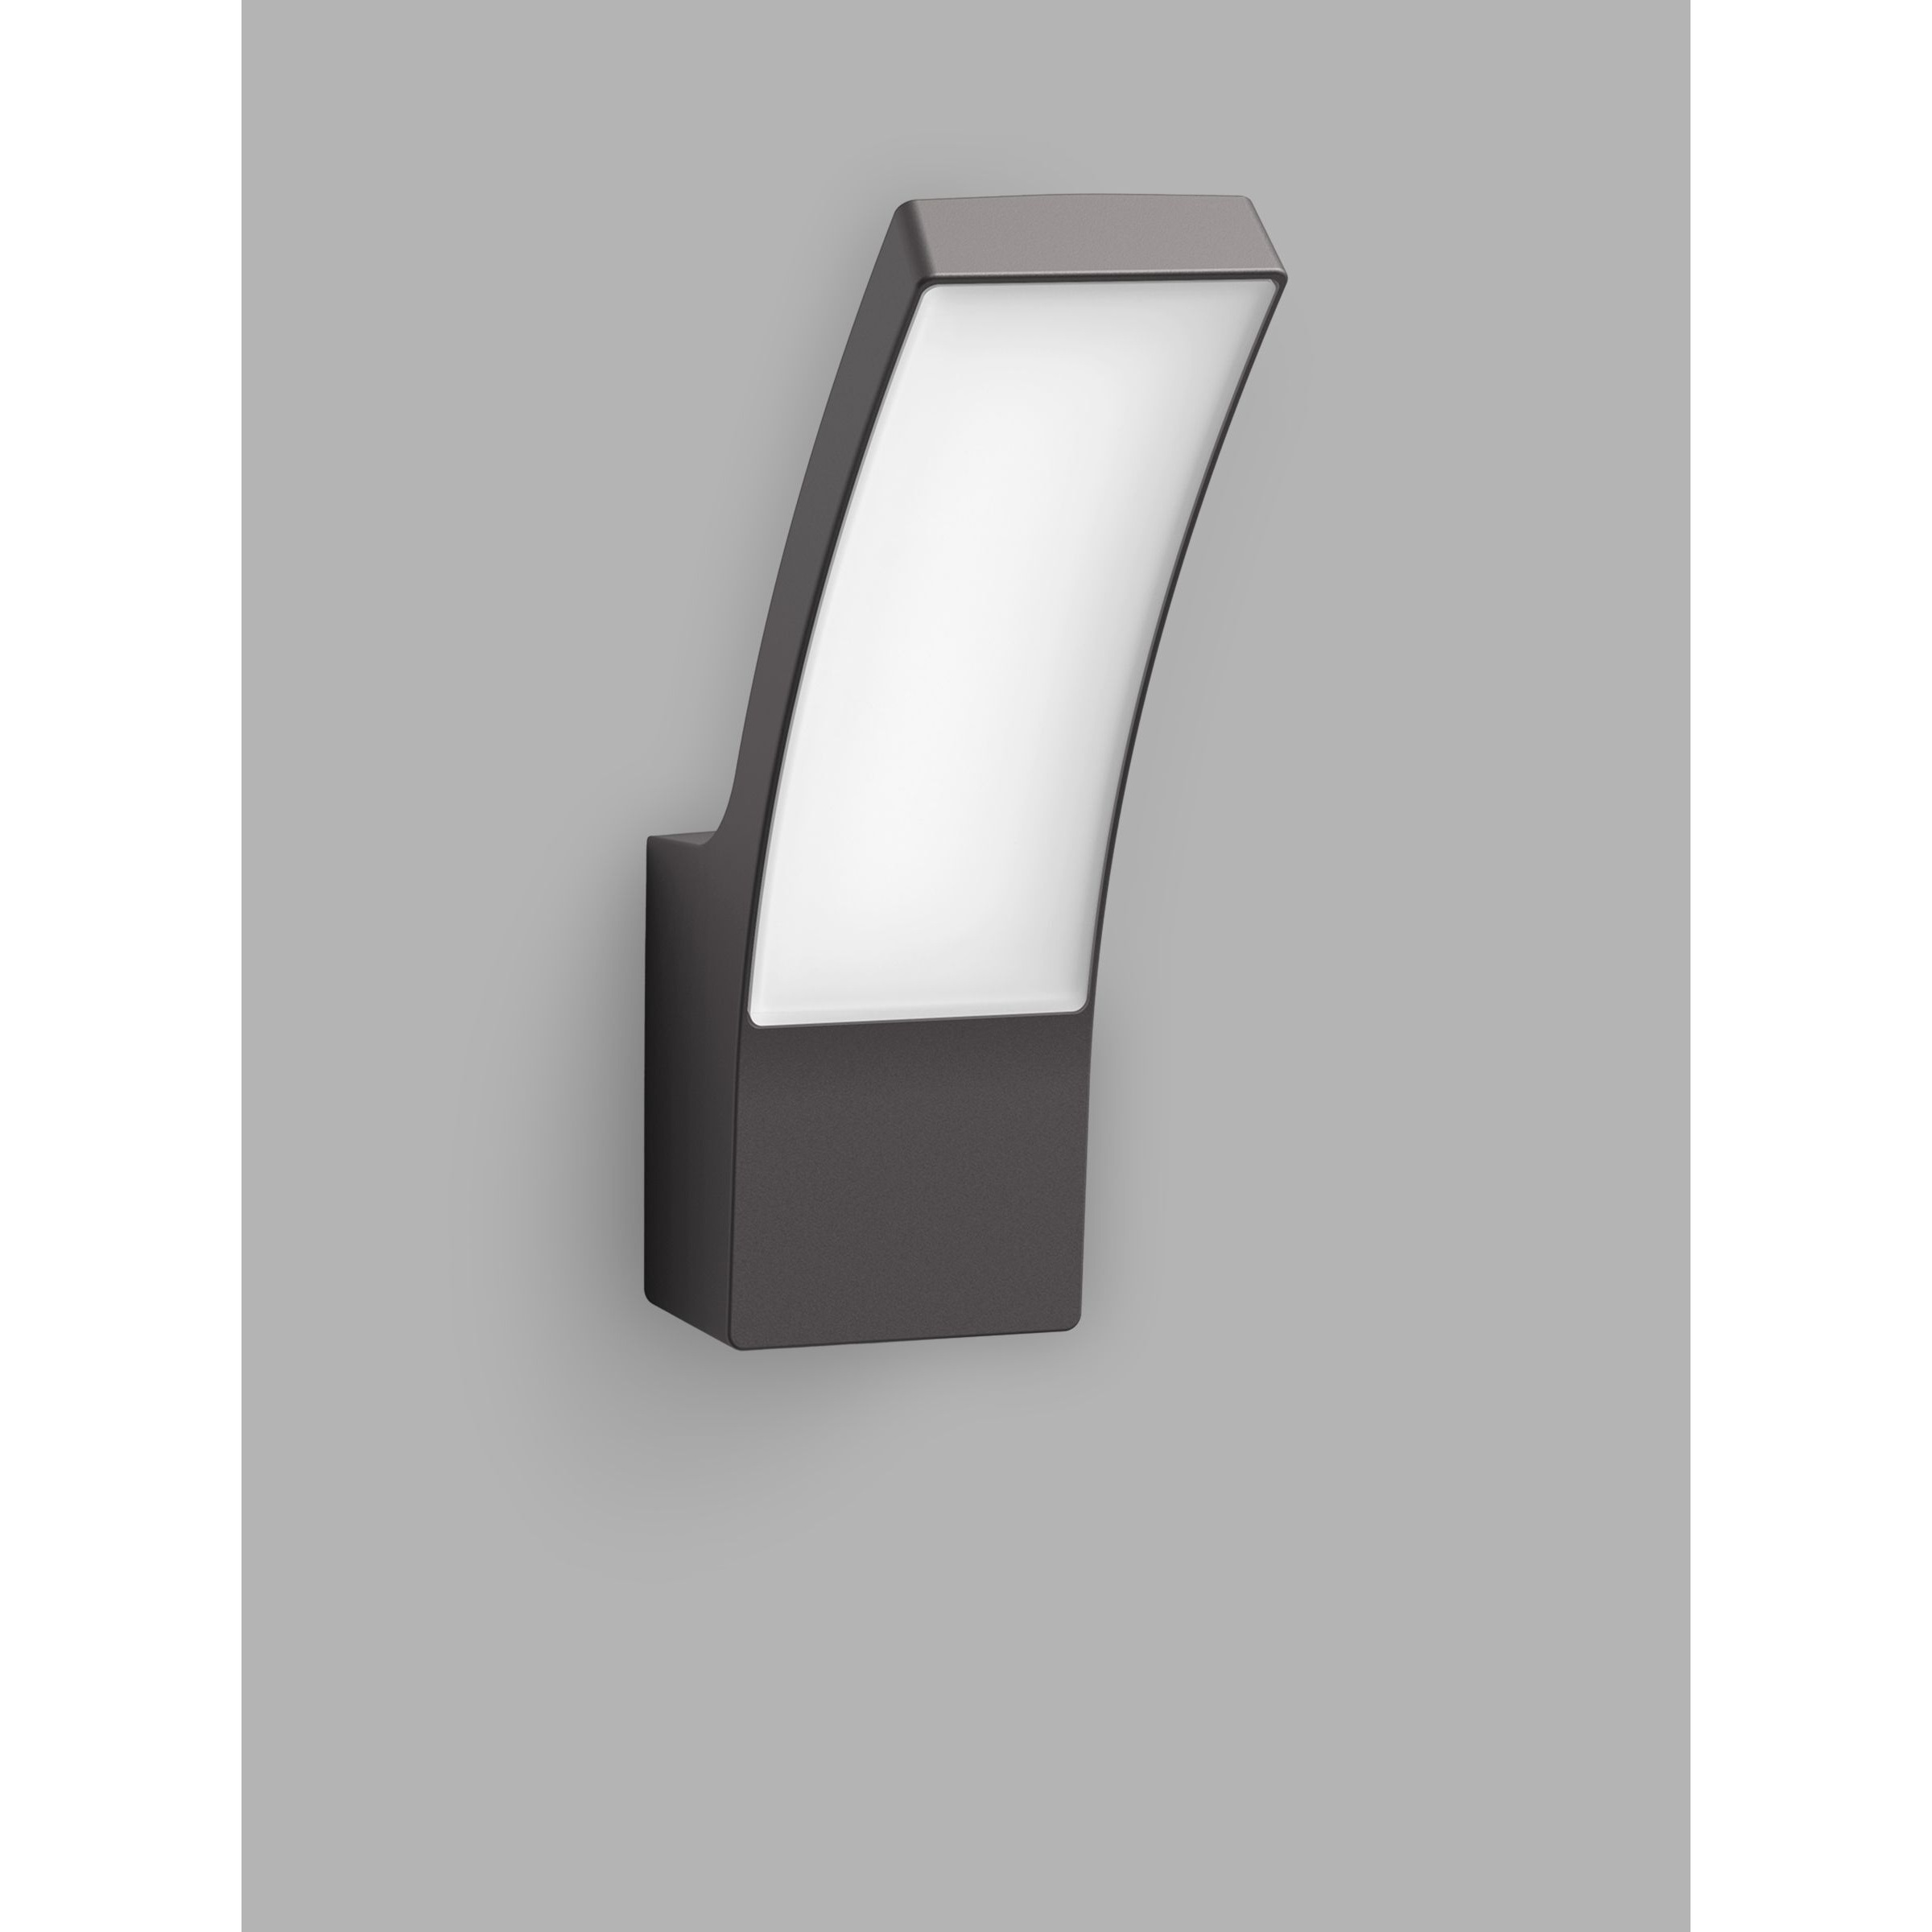 Philips Splay LED Outdoor Wall Light, Anthracite - image 1